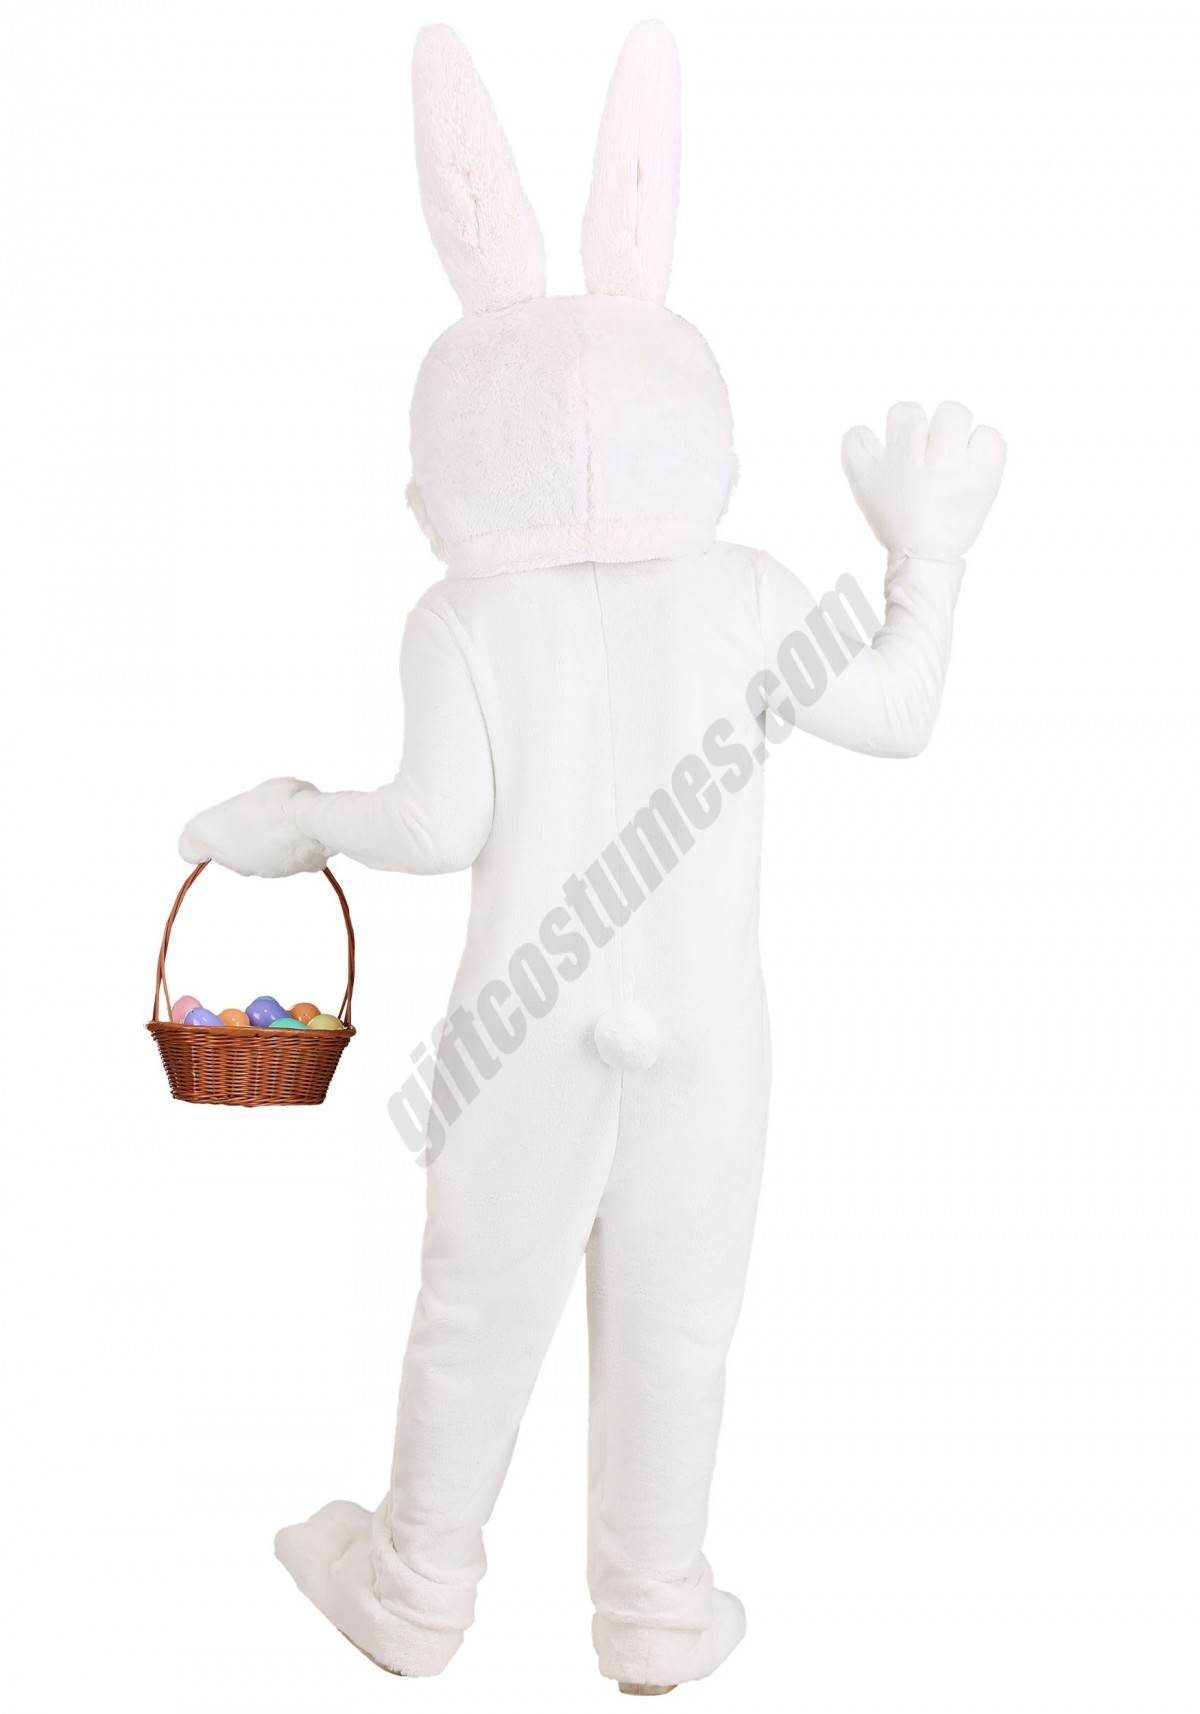 Adult Plus Size Mascot Easter Bunny Costume Promotions - -1